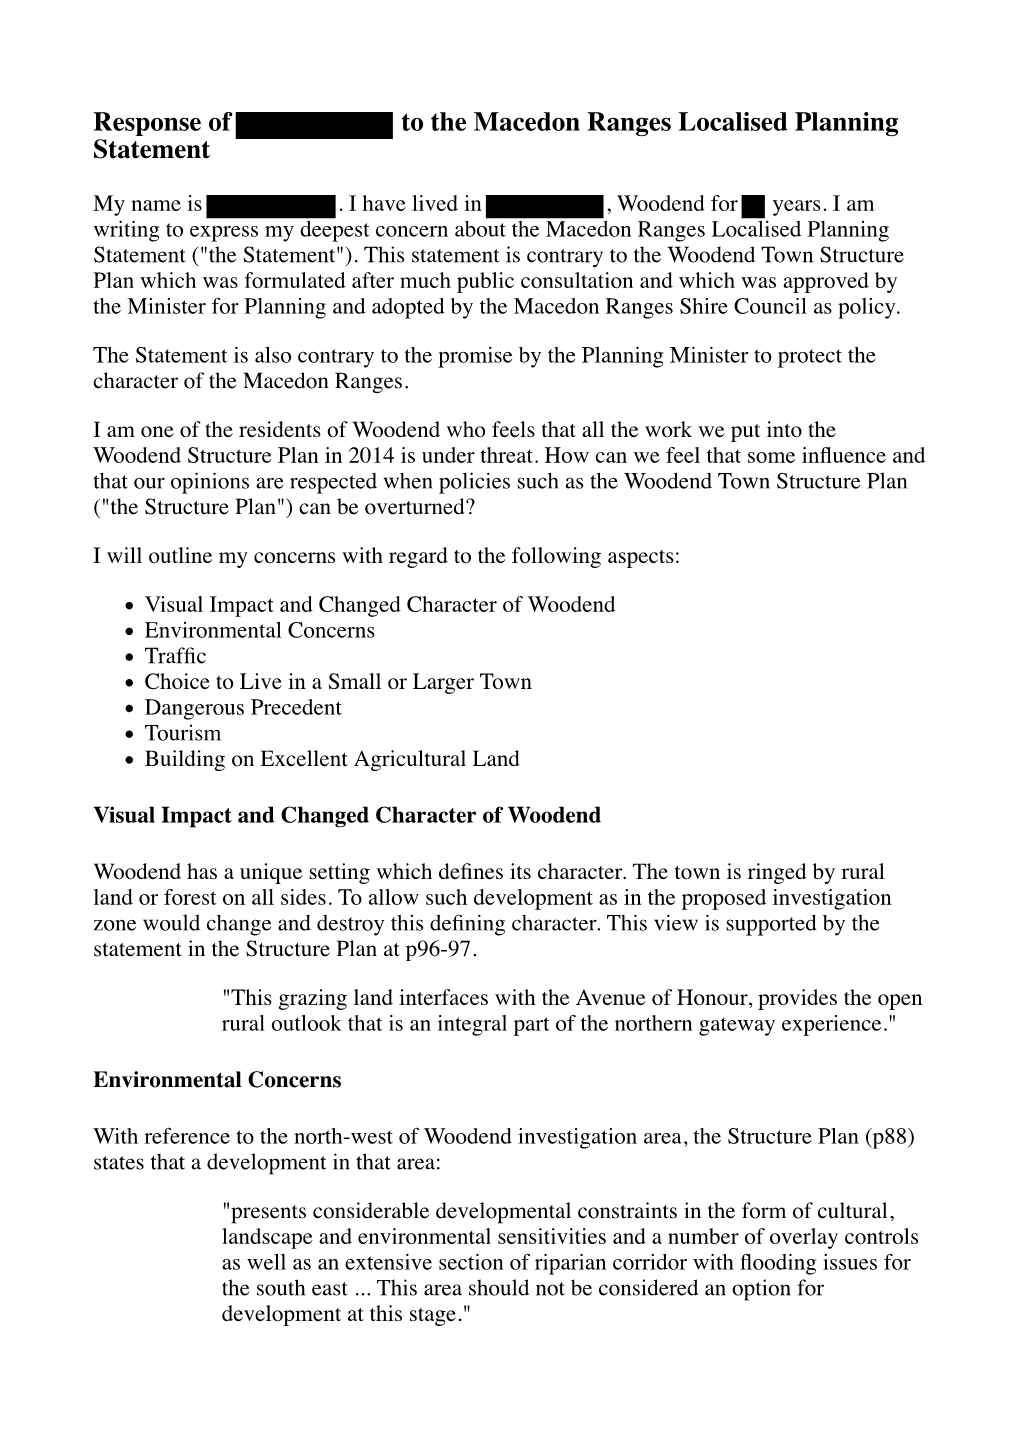 Response of to the Macedon Ranges Localised Planning Statement